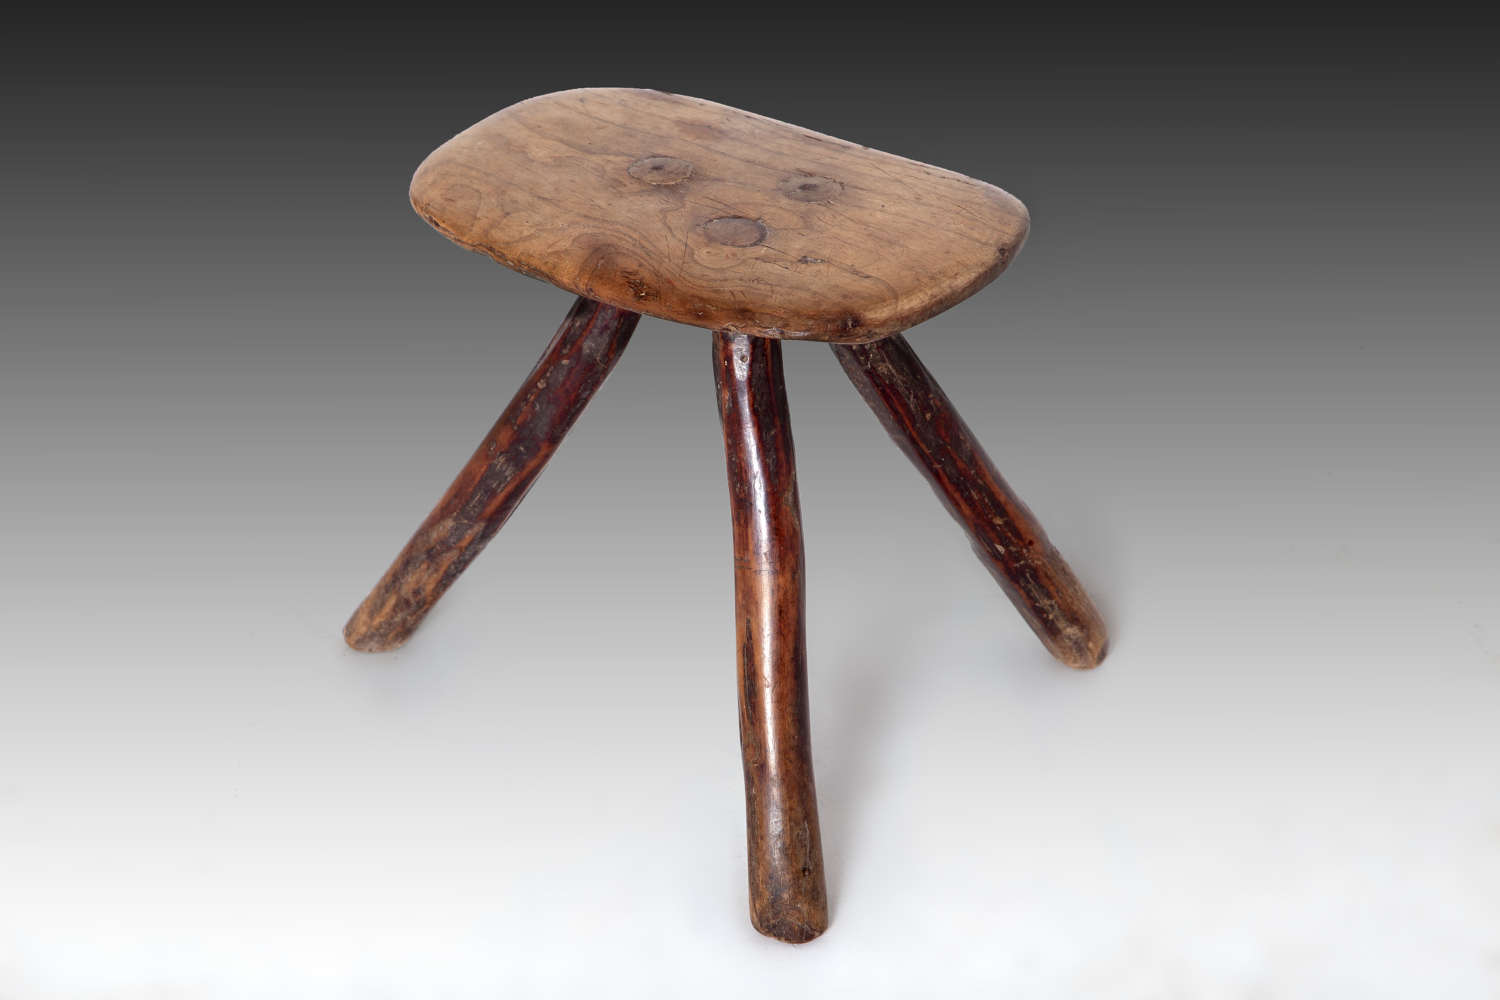 A small 19th century fruitwood stool